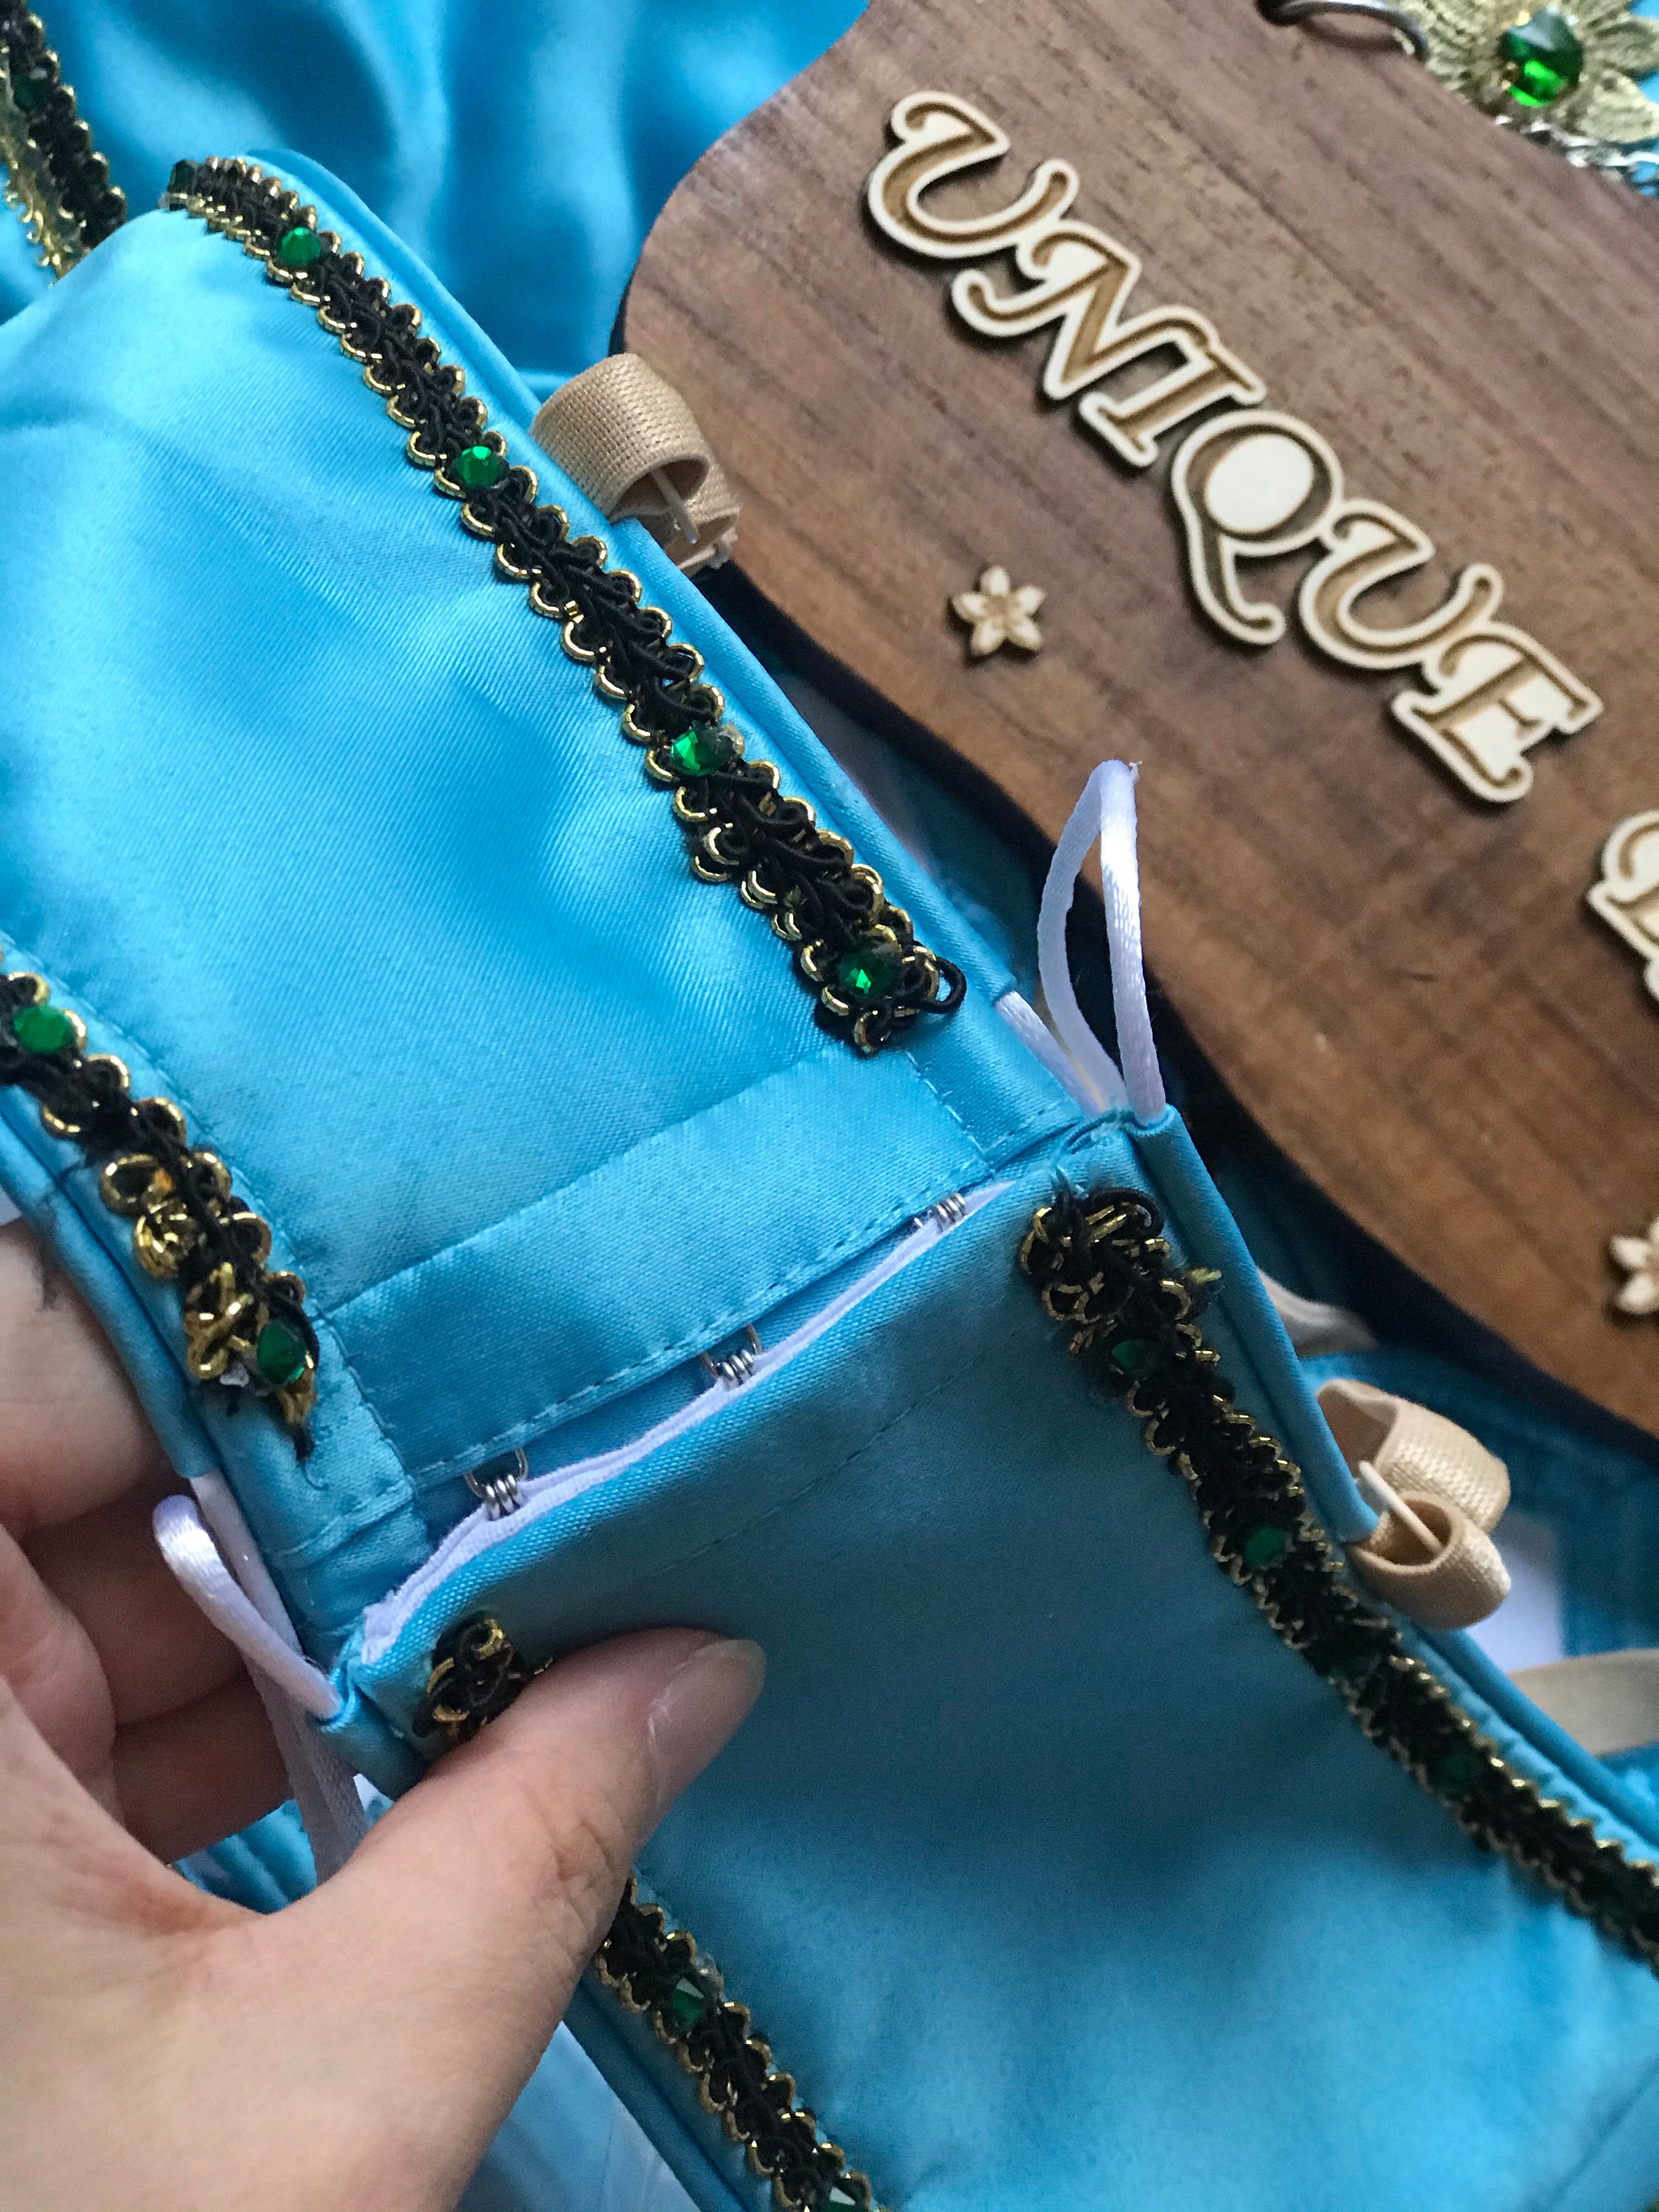 Professional Ballet Tutu Costume 2 Pieces Odalisque Le Corsaire Teal Competition Stage Dance-wear With Hooks